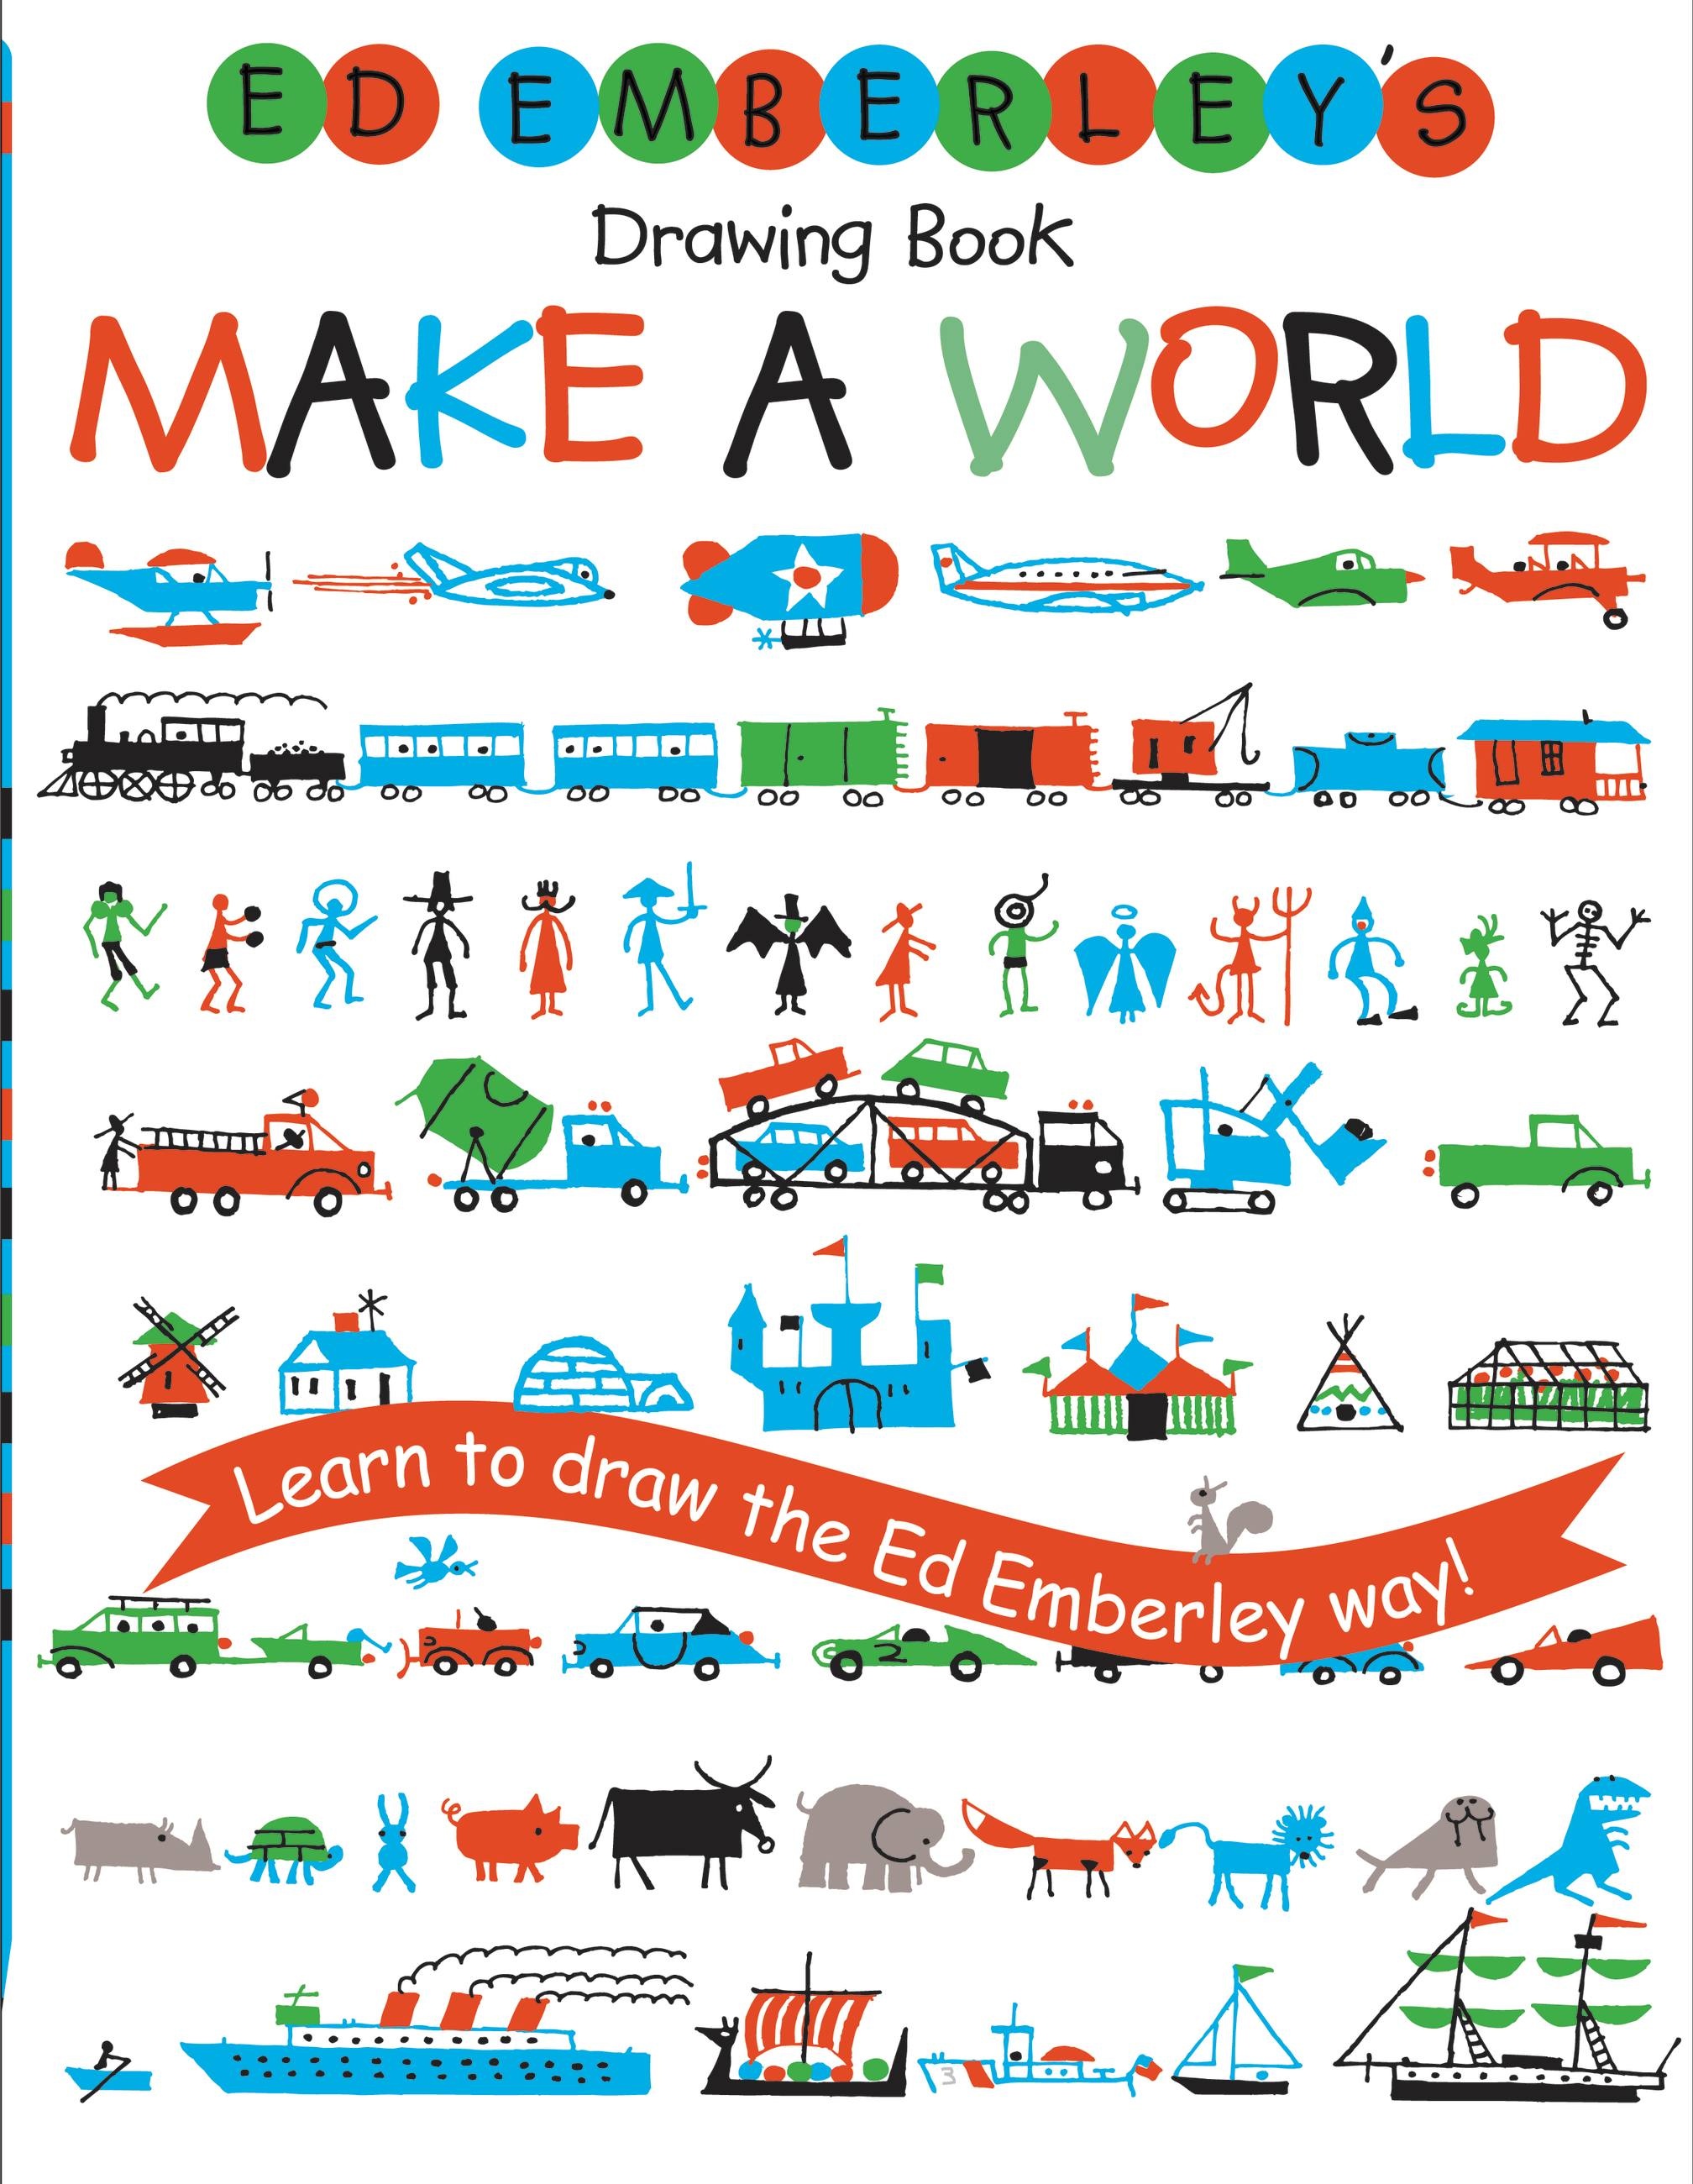 Ed Emberley's Drawing Book Make a World by Ed Emberley Hachette Book